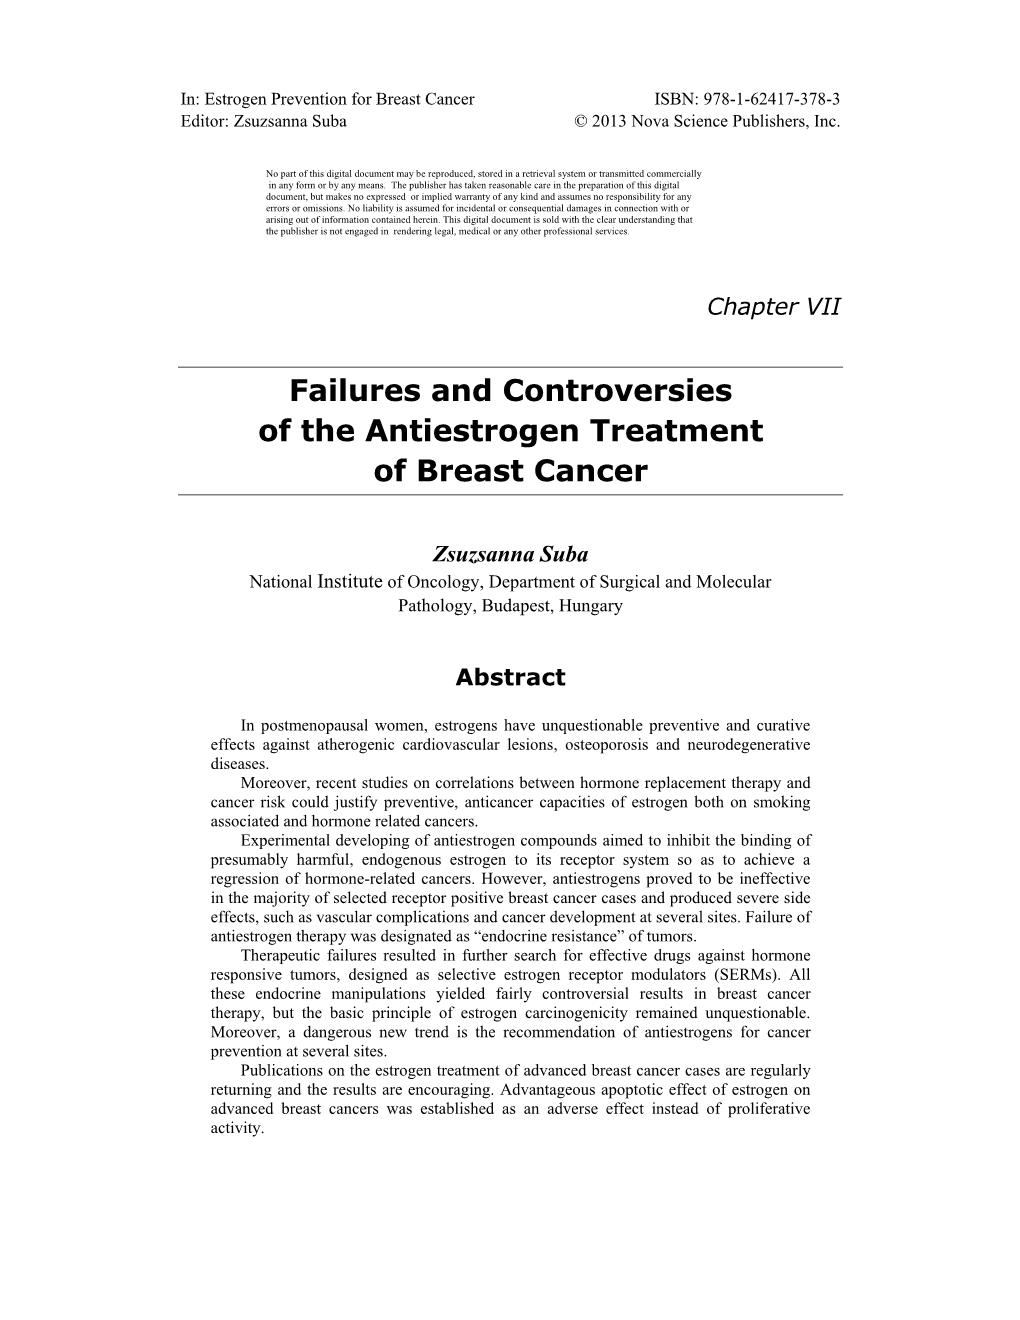 Failures and Controversies of the Antiestrogen Treatment of Breast Cancer